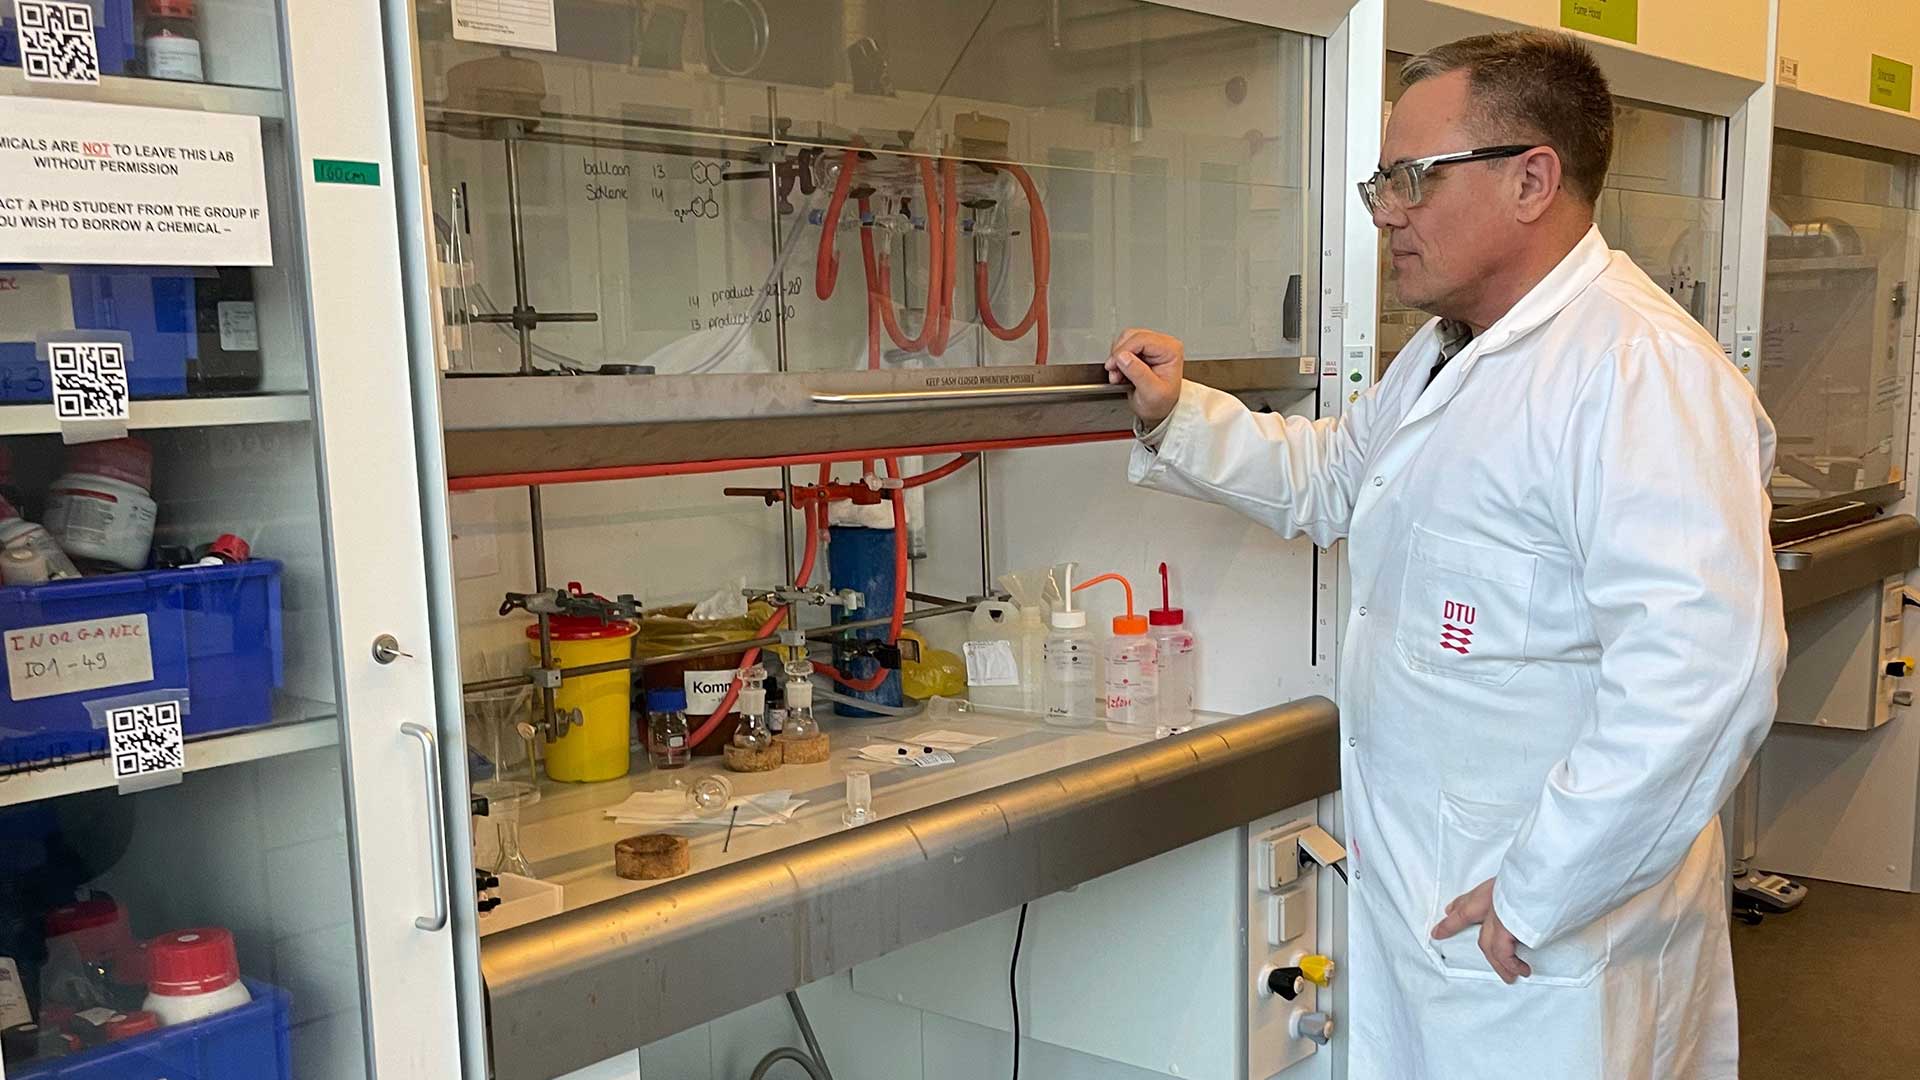 DTU Chemistry will test and evaluate whether fume hoods can be switched off in one of the teaching laboratories when it is not being used to minimize ventilation costs. 